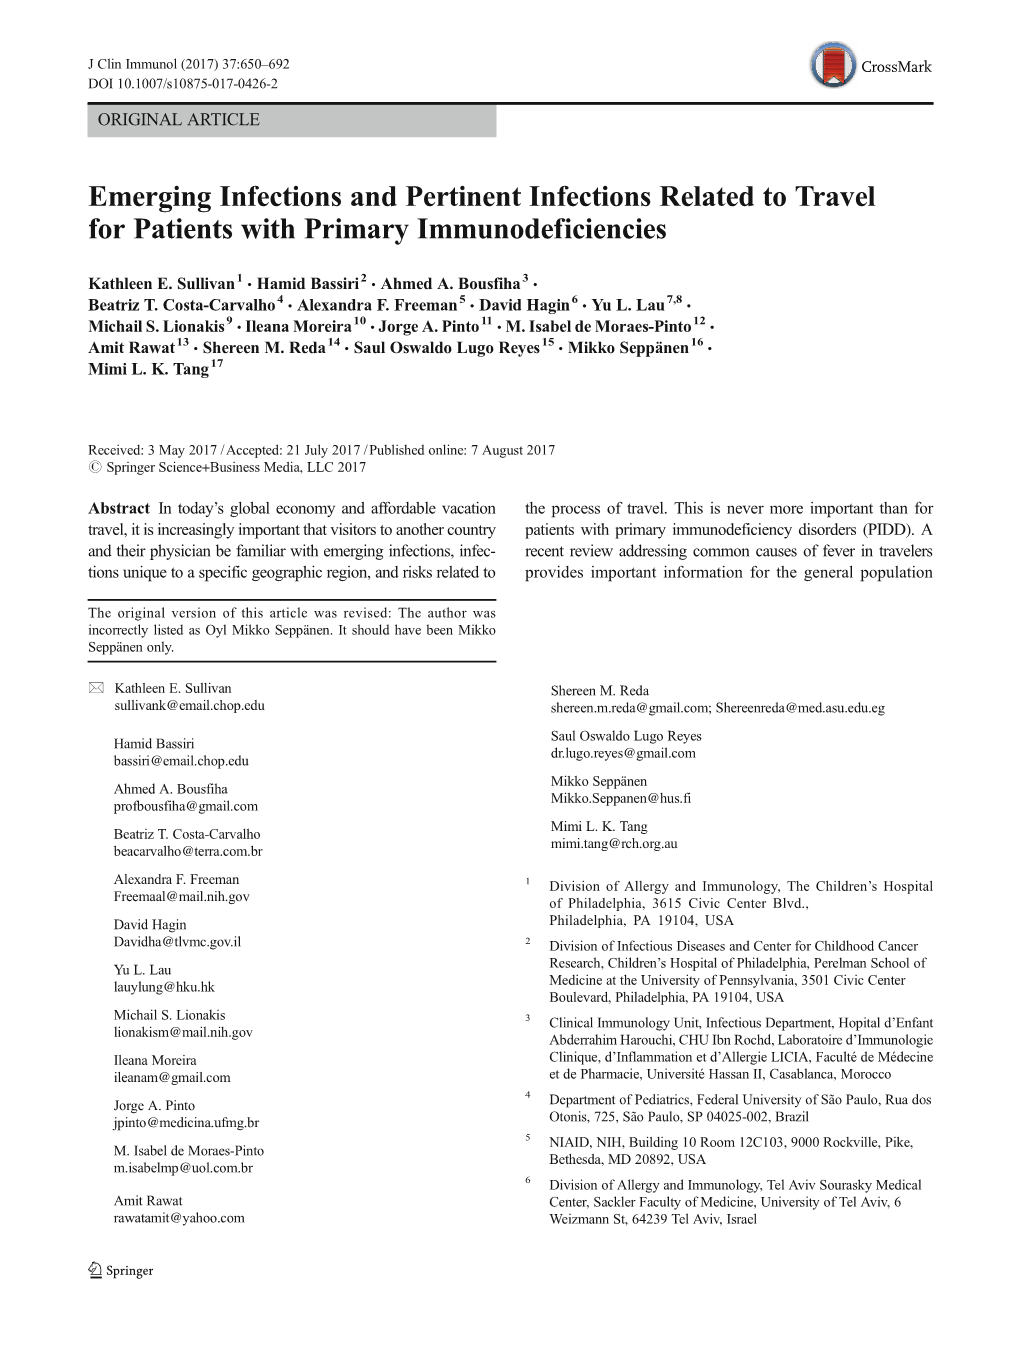 Emerging Infections and Pertinent Infections Related to Travel for Patients with Primary Immunodeficiencies